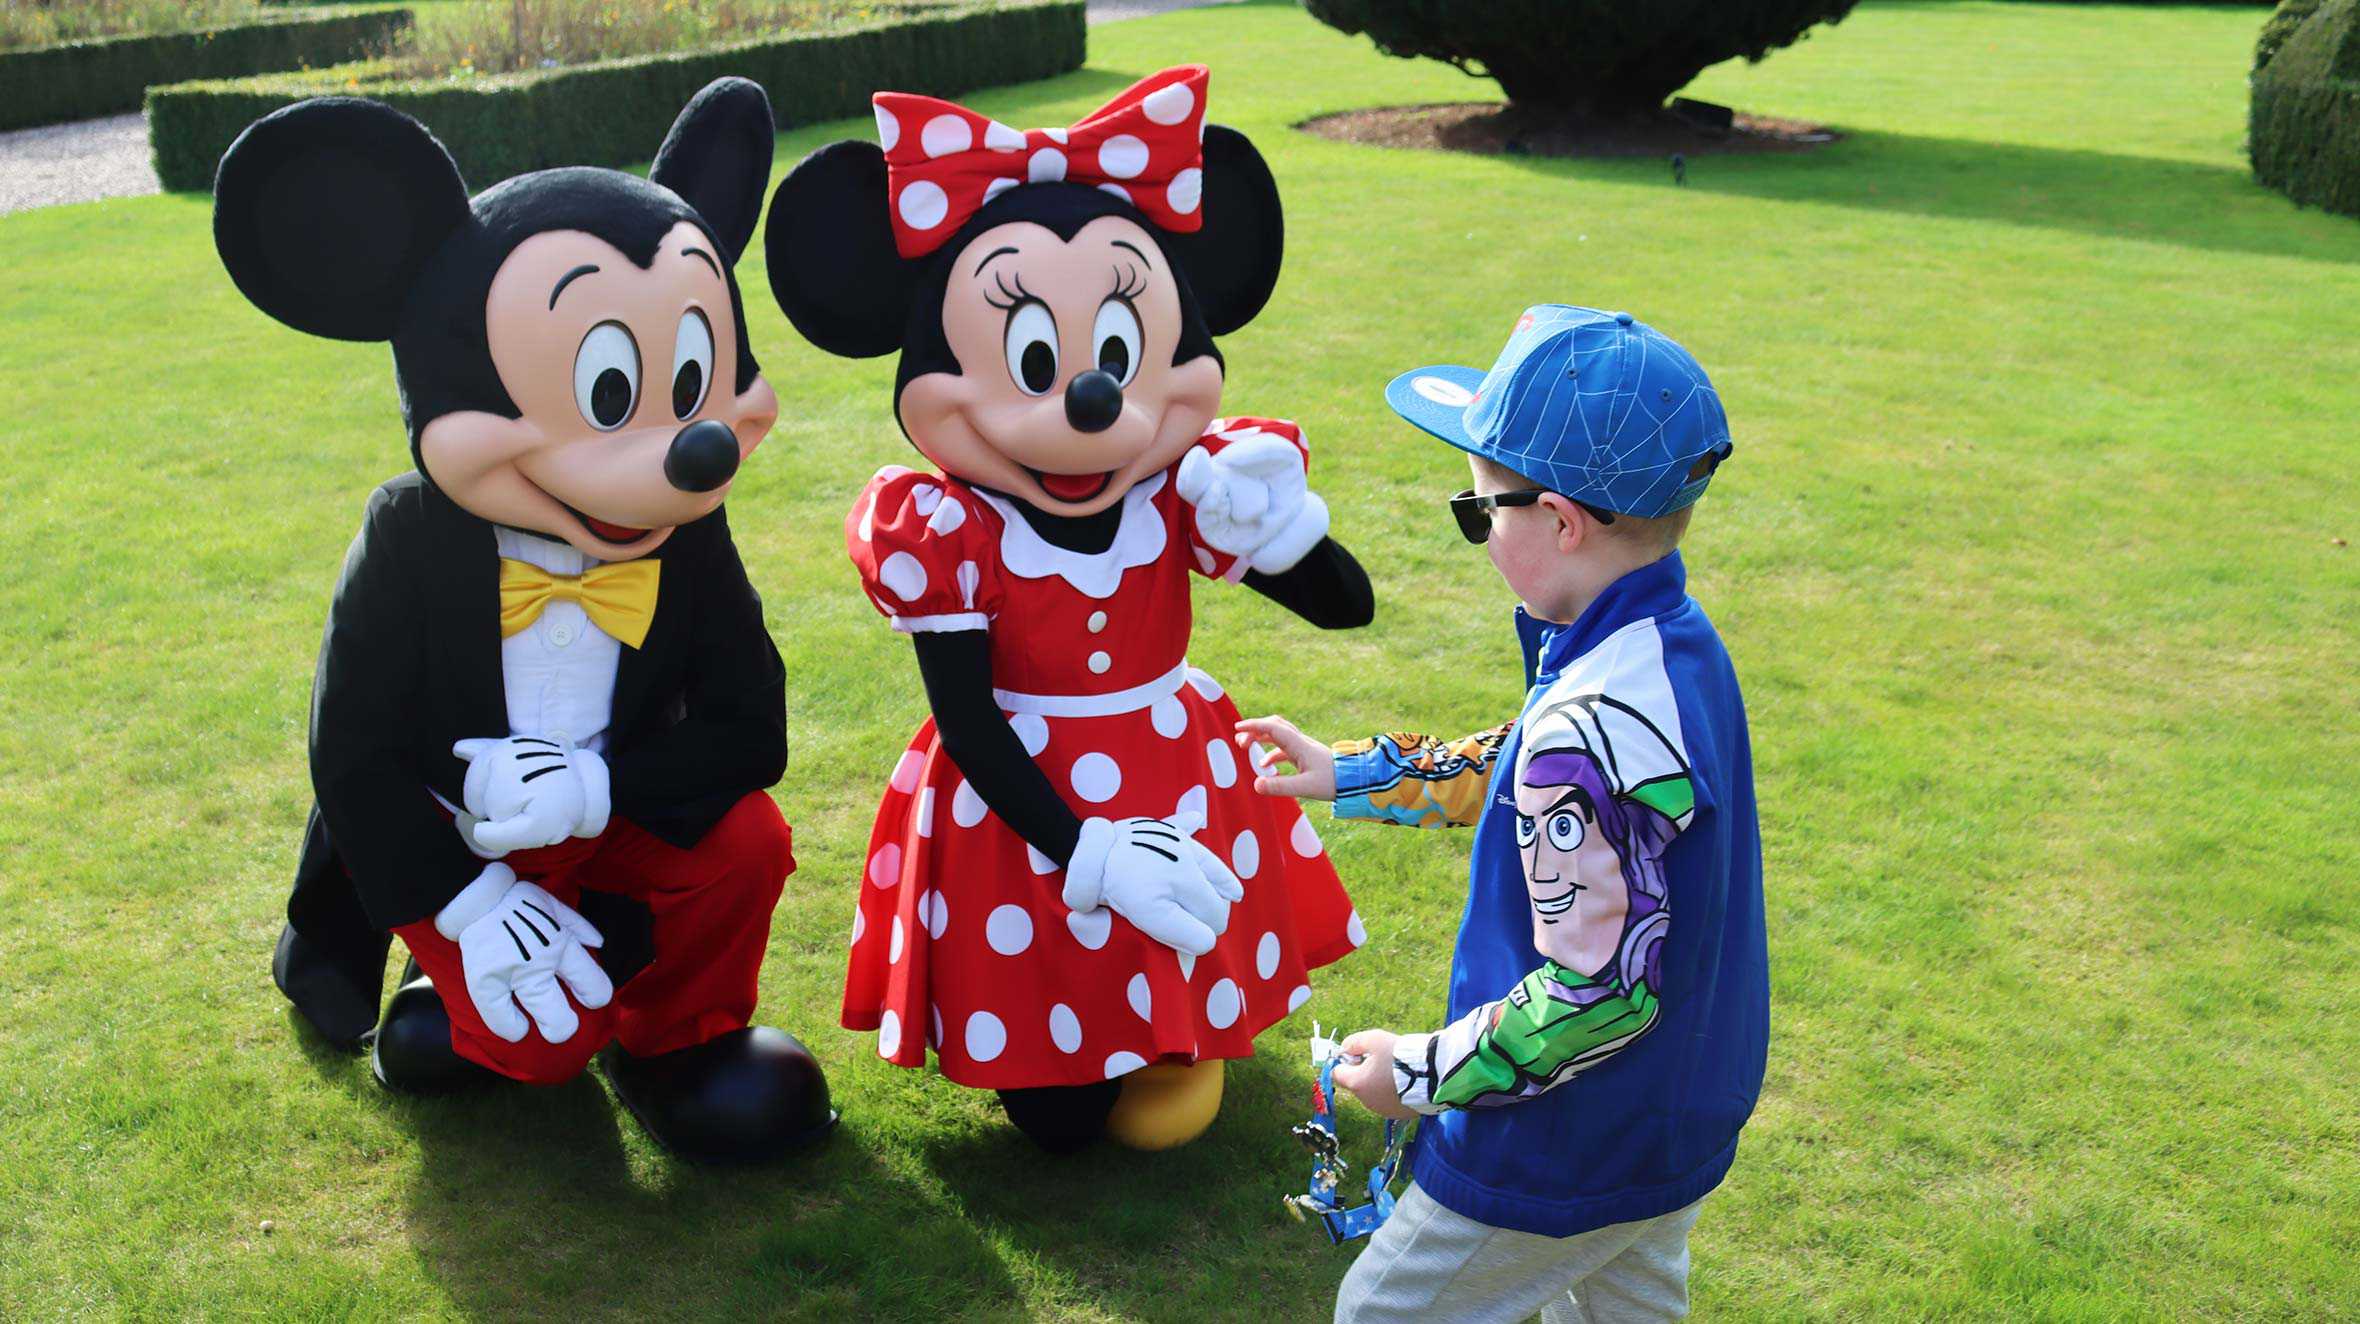 Fraser meeting Mickey and Minnie Mouse during the 2022 'A Disney Wish'.